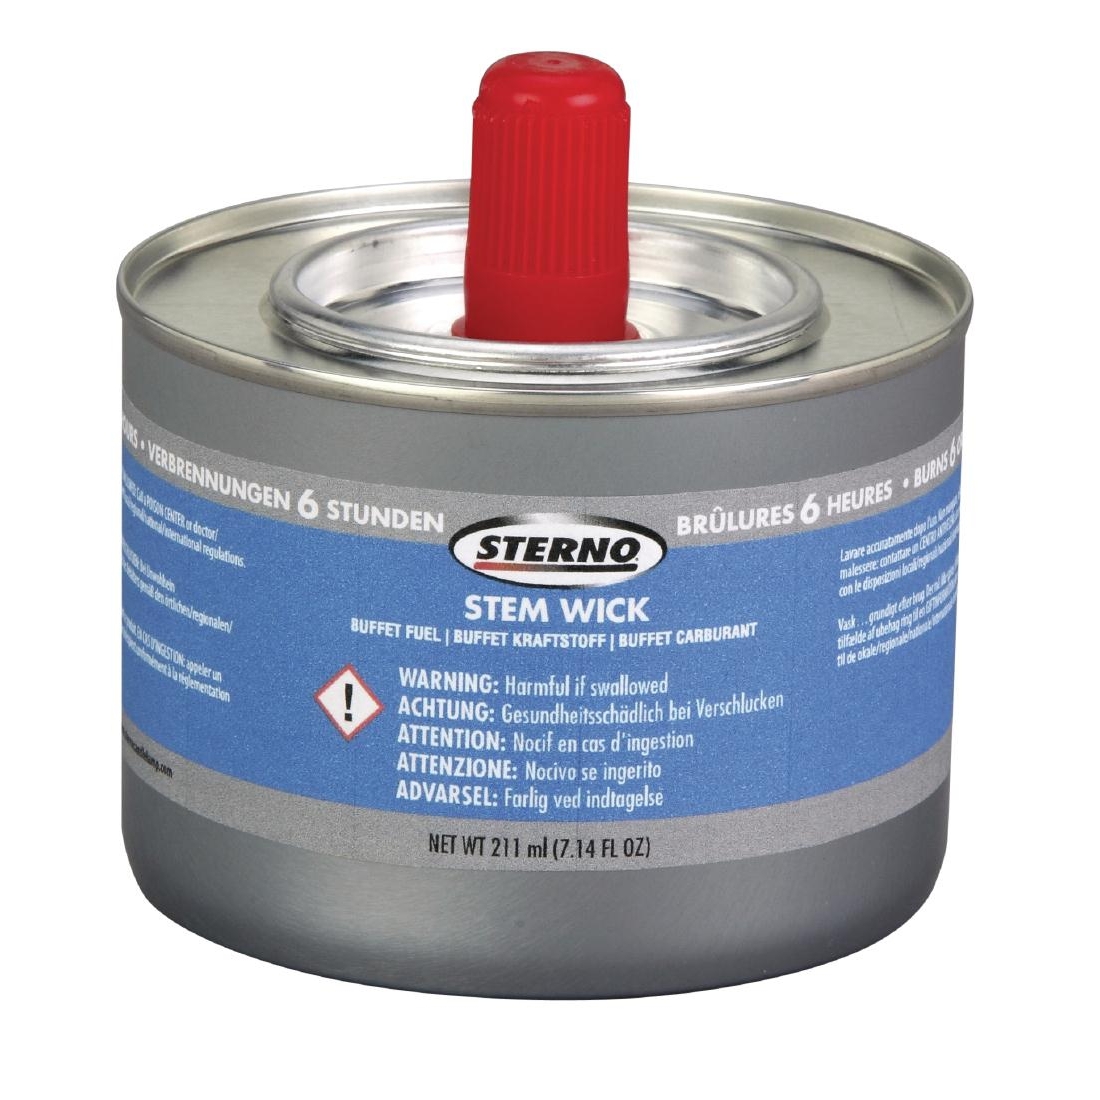 Sterno Stem Wick Liquid Chafing Fuel With Wick 6 Hour x 12